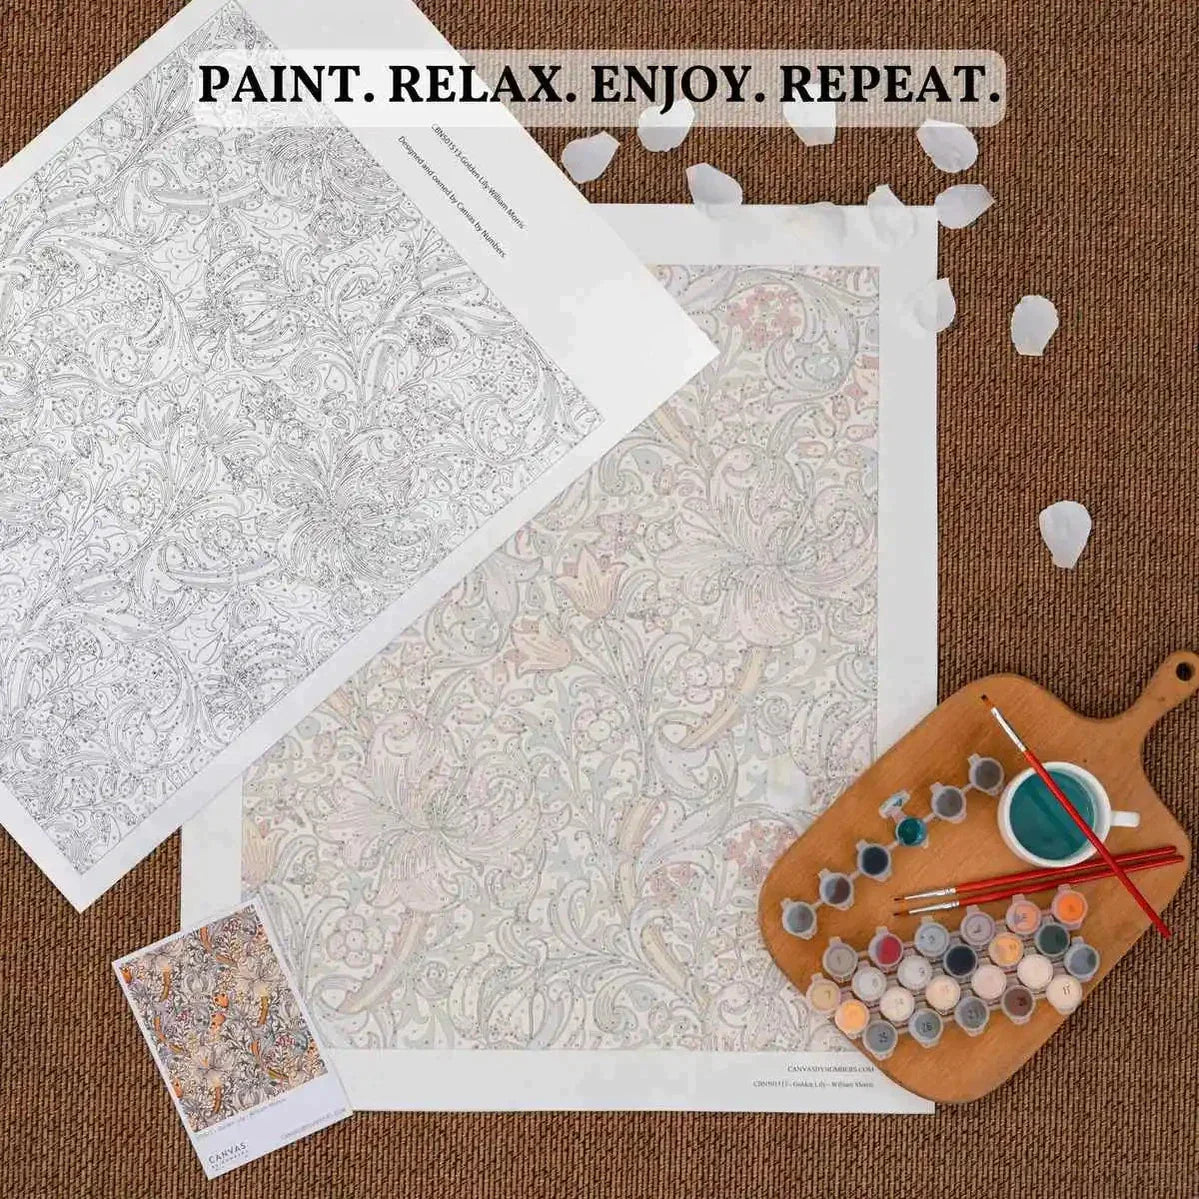 Easter Rabbits and Colorful Flowers - Paint by Numbers-Celebrate Easter with our charming Easter Rabbits paint by numbers kit. Bring the joy of the holiday to life with adorable rabbit paintings - Canvas by Numbers.-Canvas by Numbers